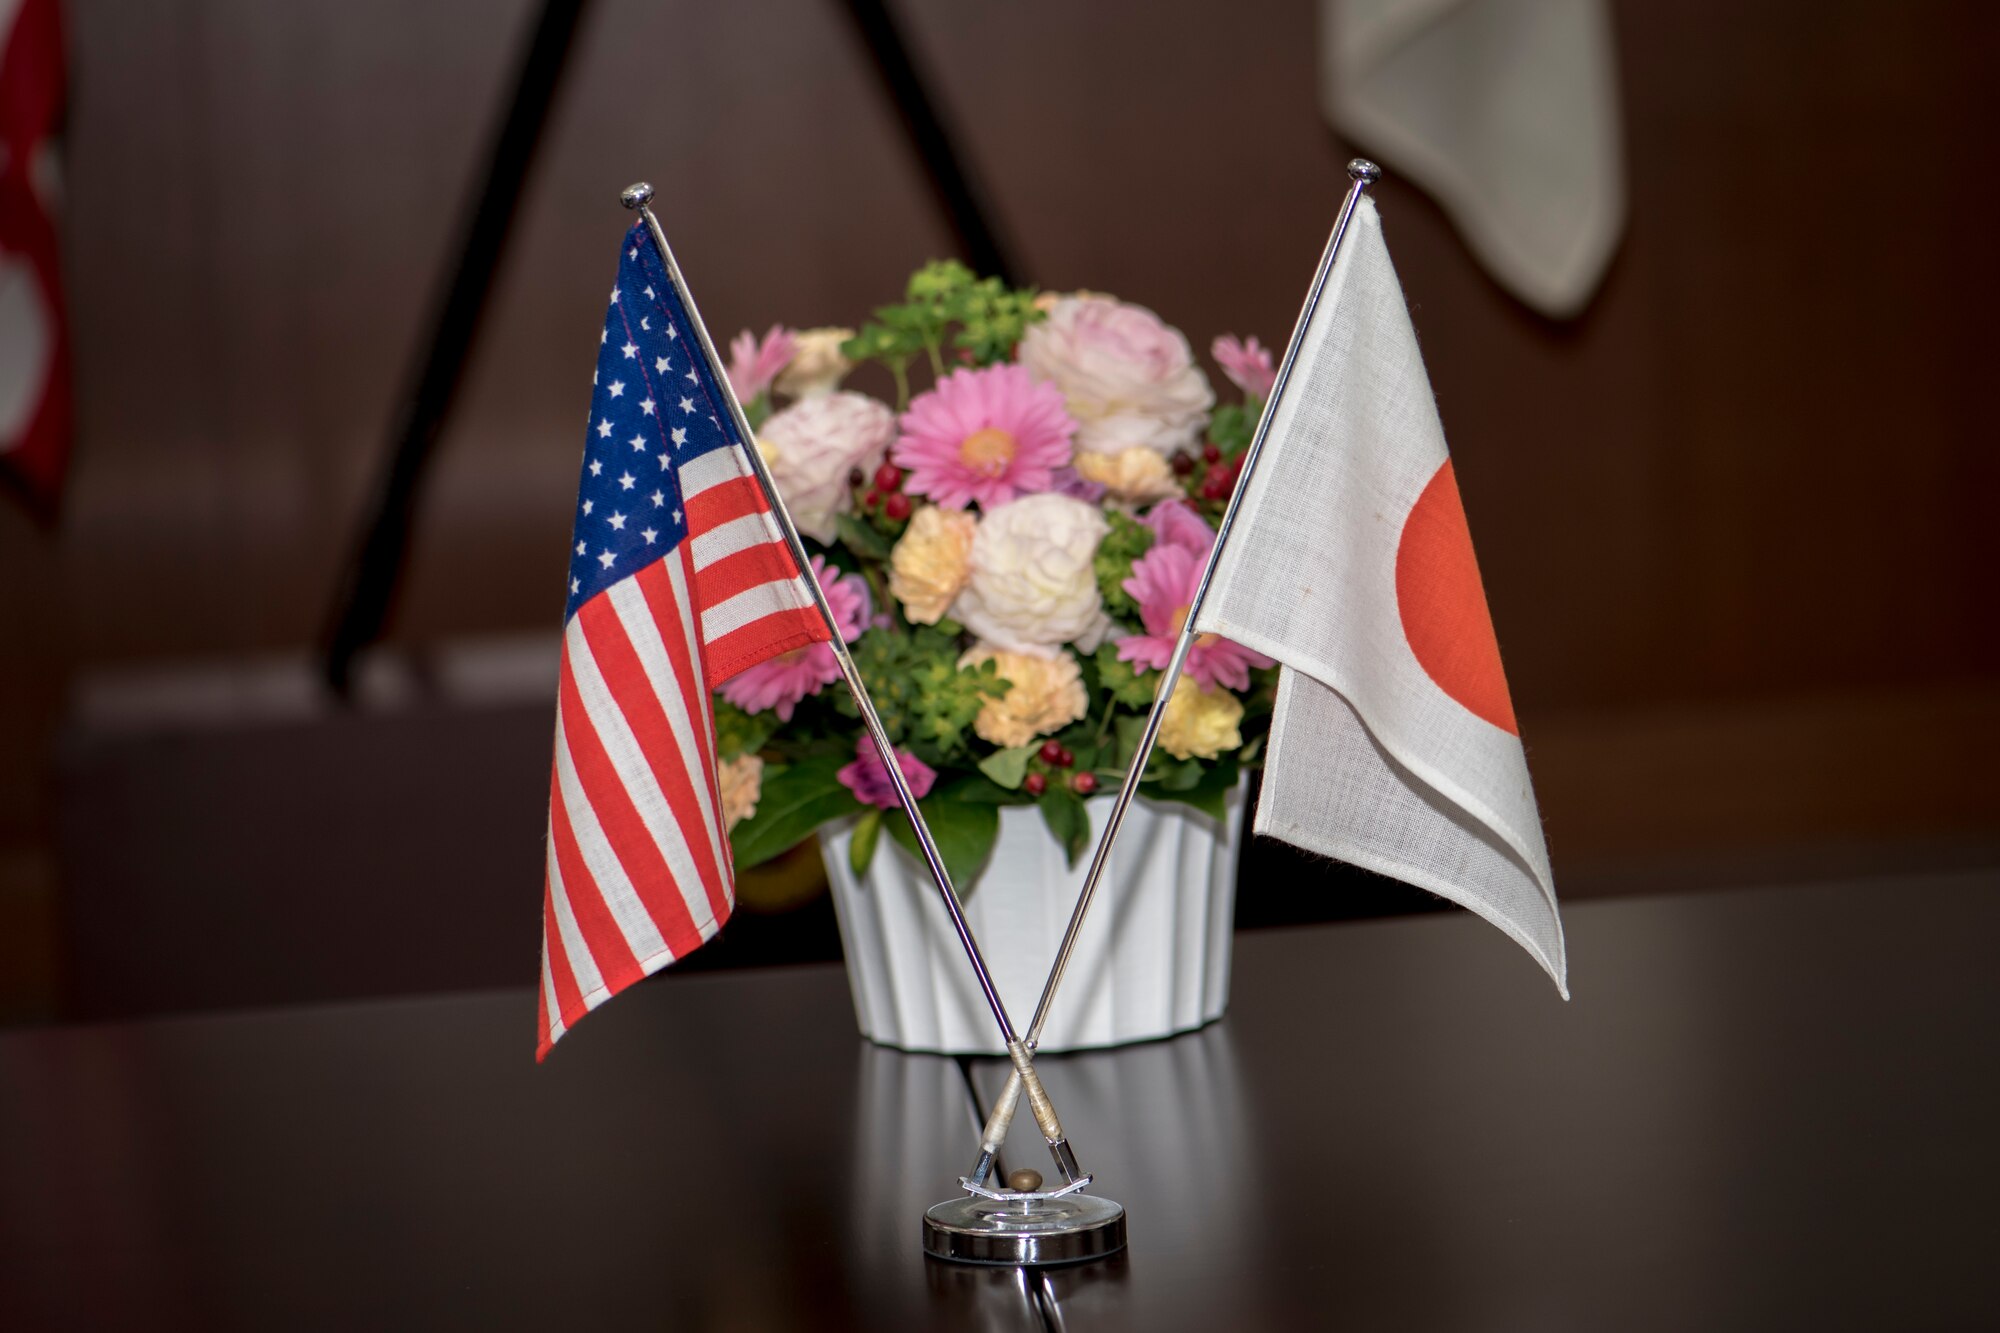 U.S. and Japan protocol flags sit next to a bundle of flowers on a table during a meeting between U.S. Air Force Master Sgt. Cesar Ventura and two Japan Air Self-Defense Force warrant officers with the 3rd Air Wing at Misawa Air Base, Japan, Feb. 14, 2018. The three met to discuss one of the warrant's retirement plans. This meeting reflects a very common theme for the three men who over the past four years have become "like family." Ventura is a vertical inspections planner with the 35th Fighter Wing's Inspector General's office and hails from Los Angeles, California. (U.S. Air Force photo by Tech. Sgt. Benjamin W. Stratton)